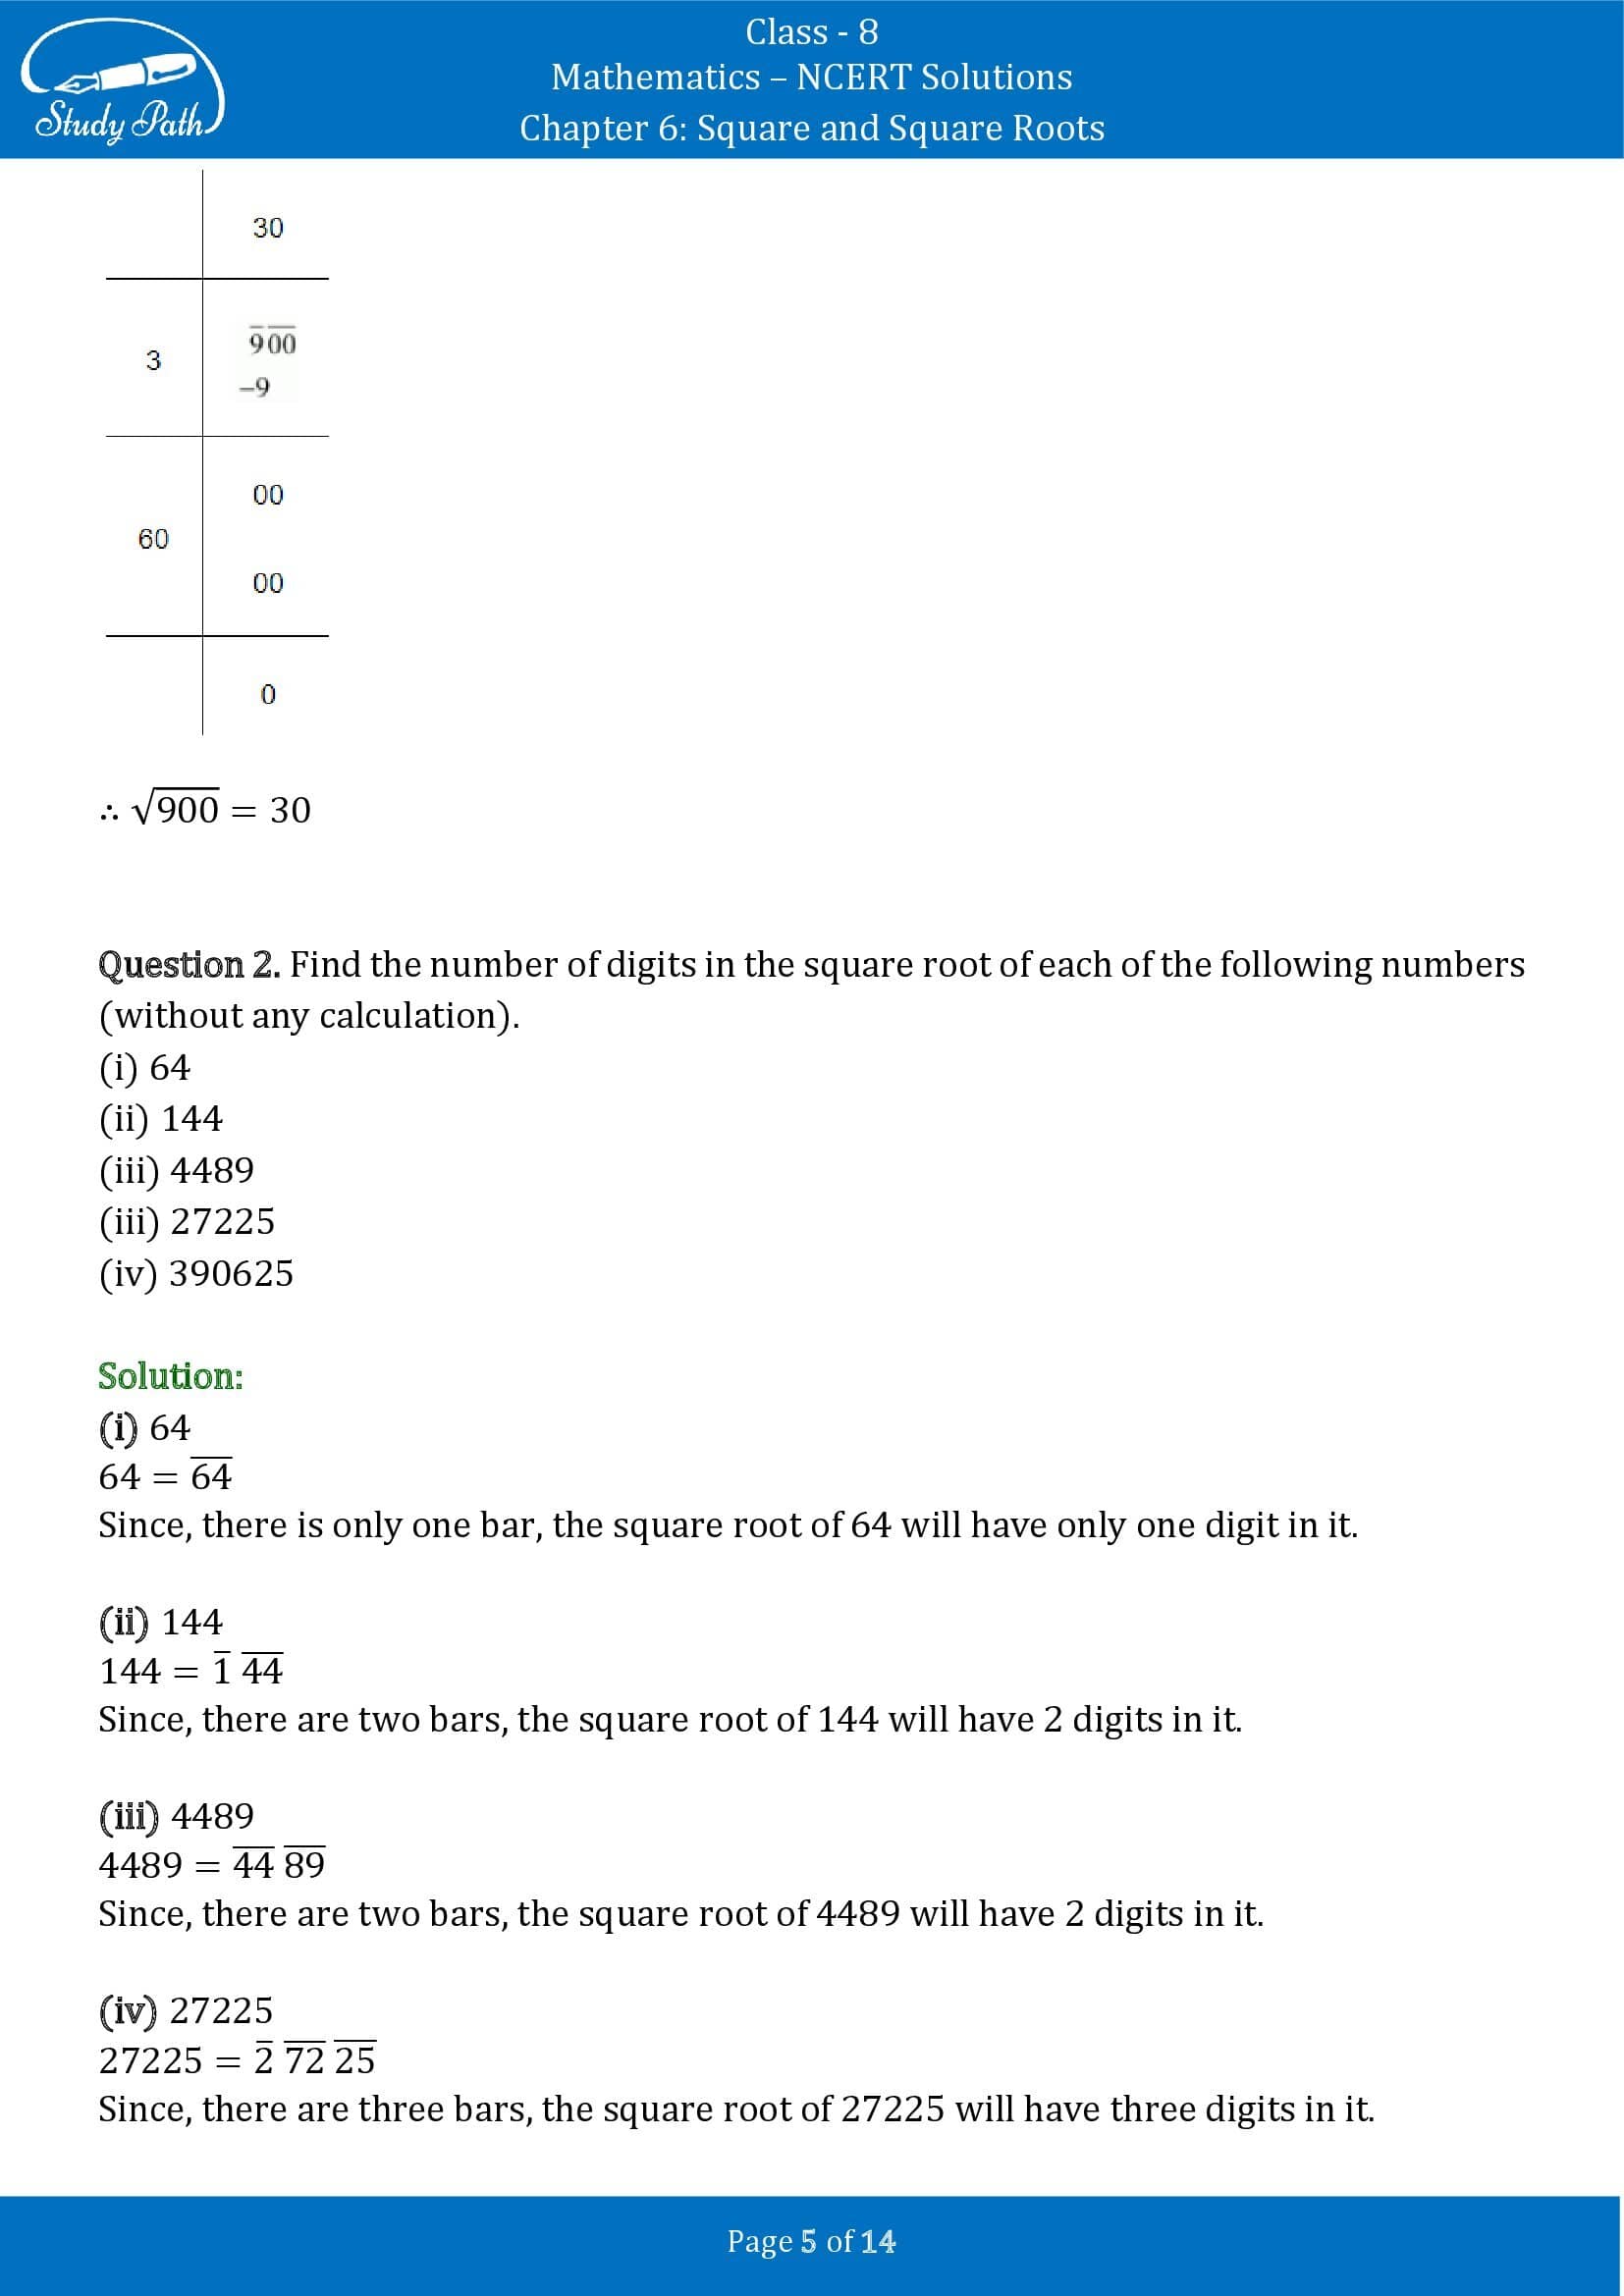 NCERT Solutions for Class 8 Maths Chapter 6 Square and Square Roots Exercise 6.4 00005